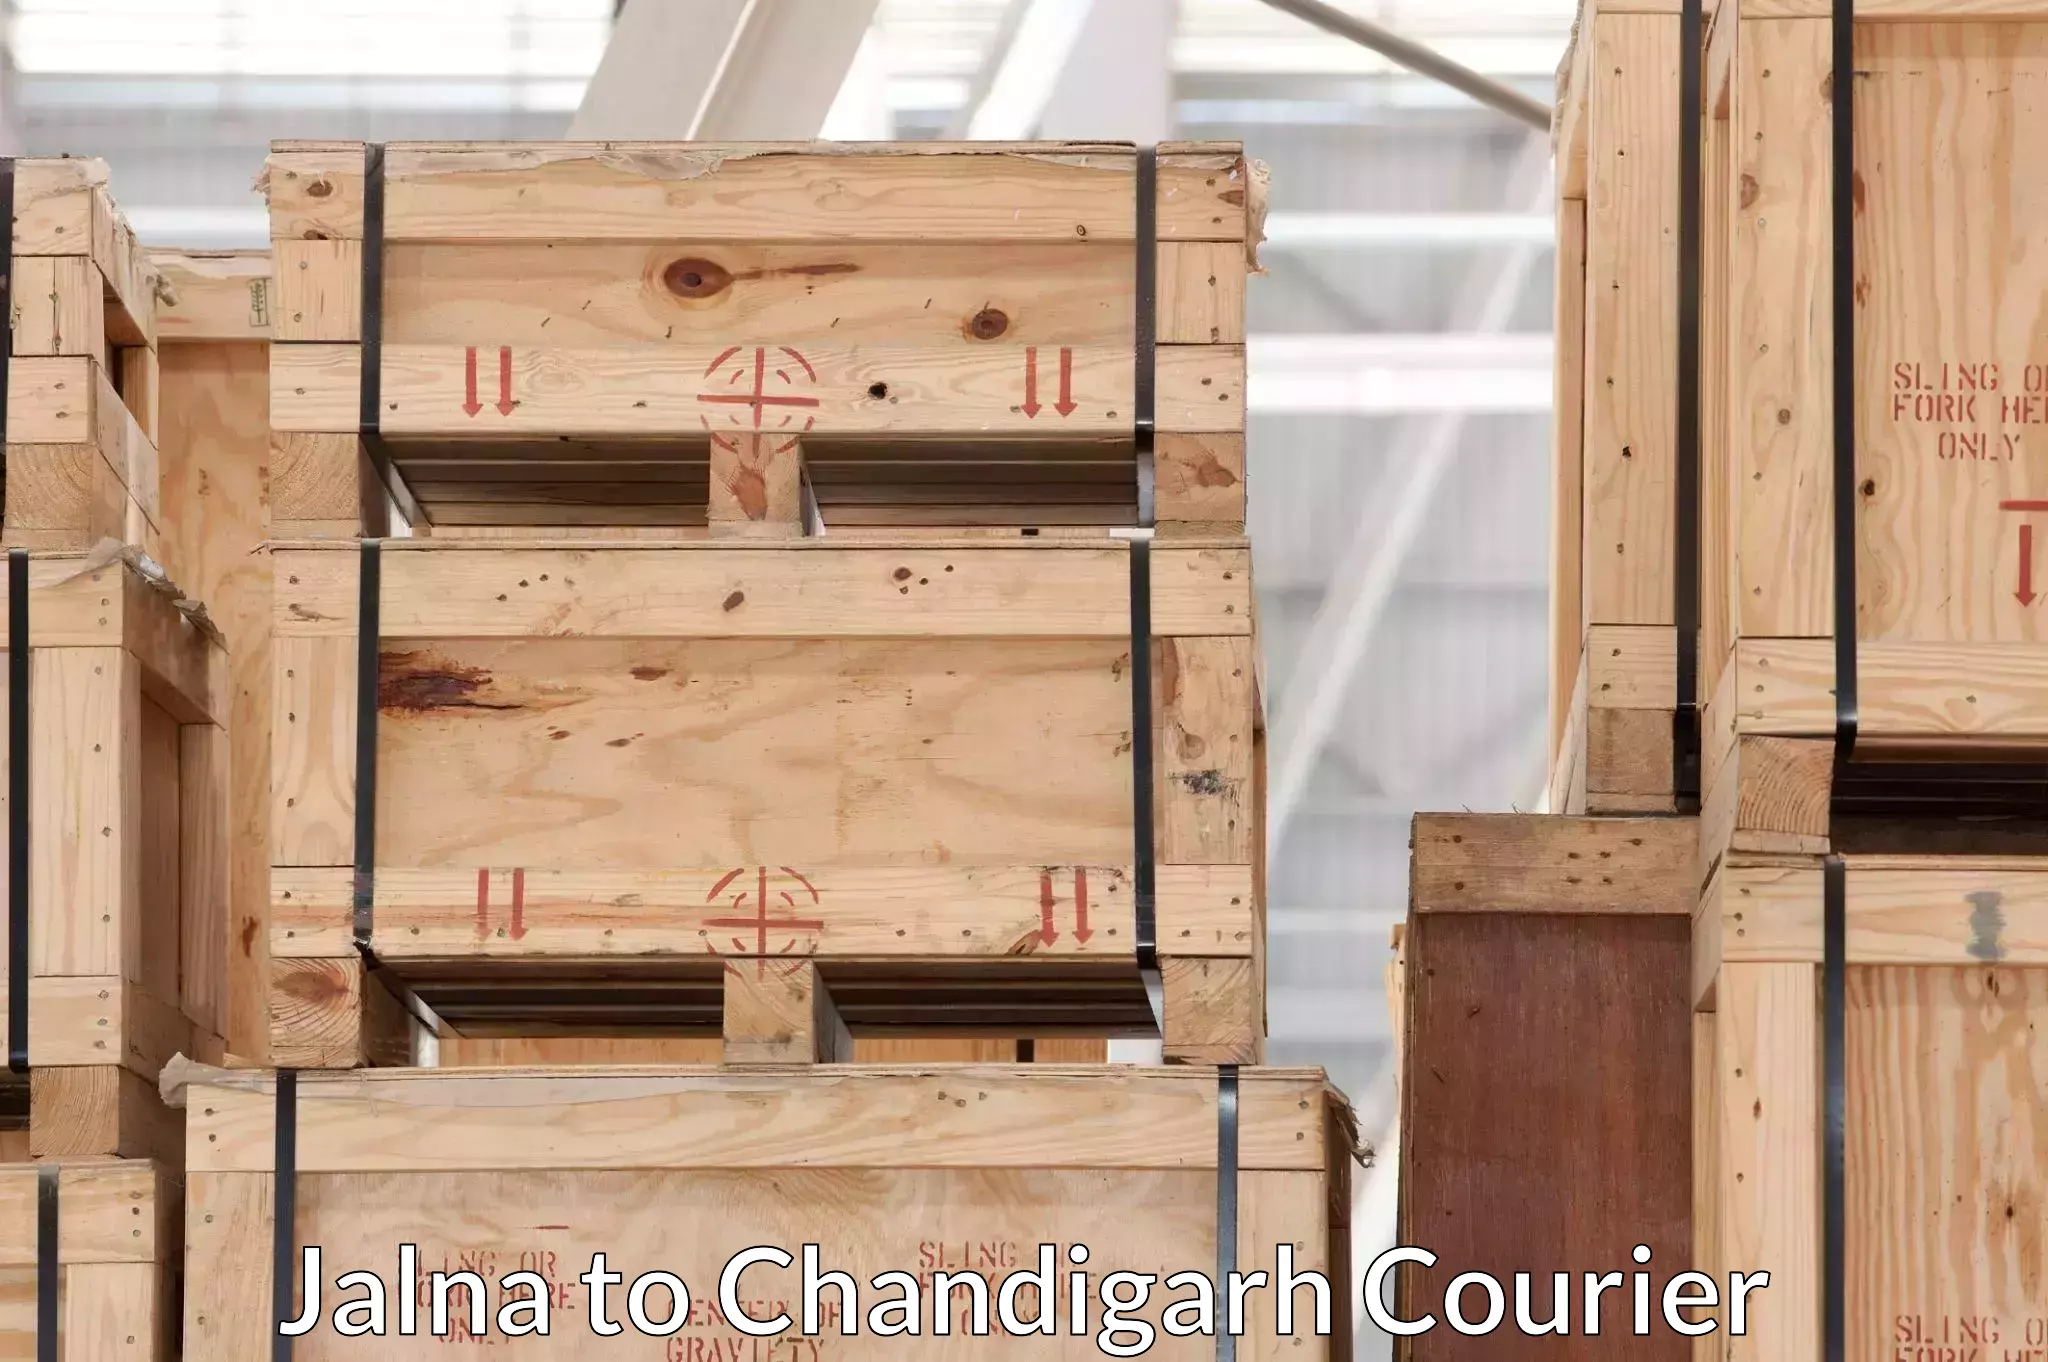 Furniture delivery service Jalna to Chandigarh